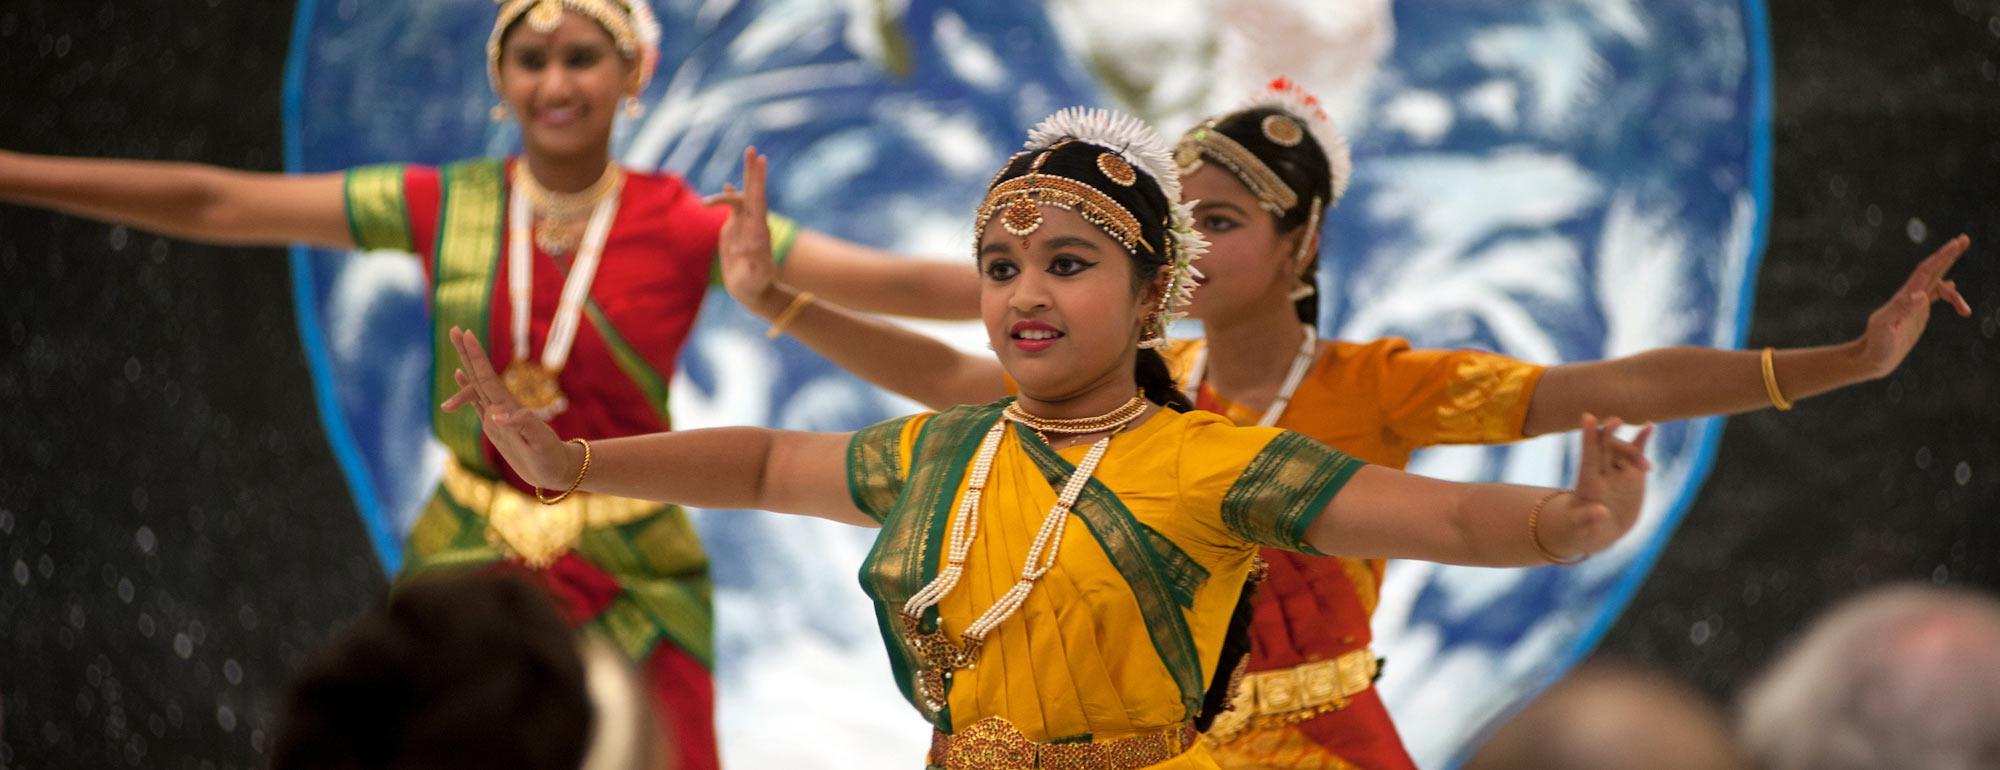 A group of young women preform a South Asian style dance